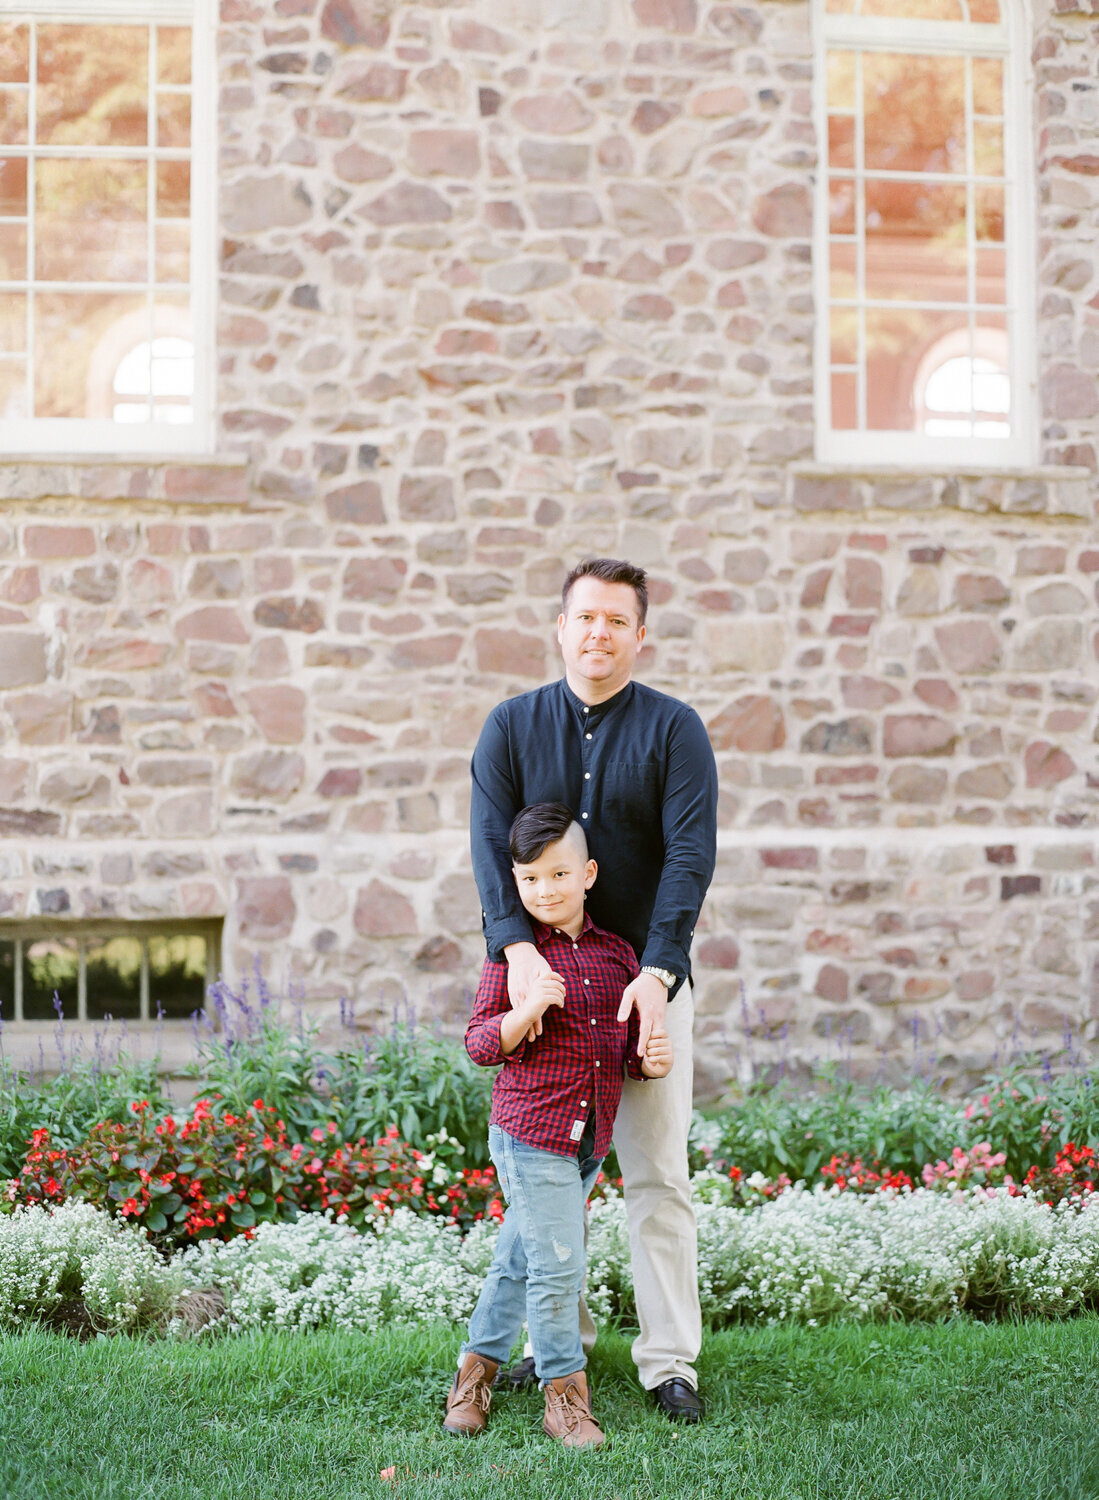 Jacqueline Anne Photography - Family Photographer in Halifax-12